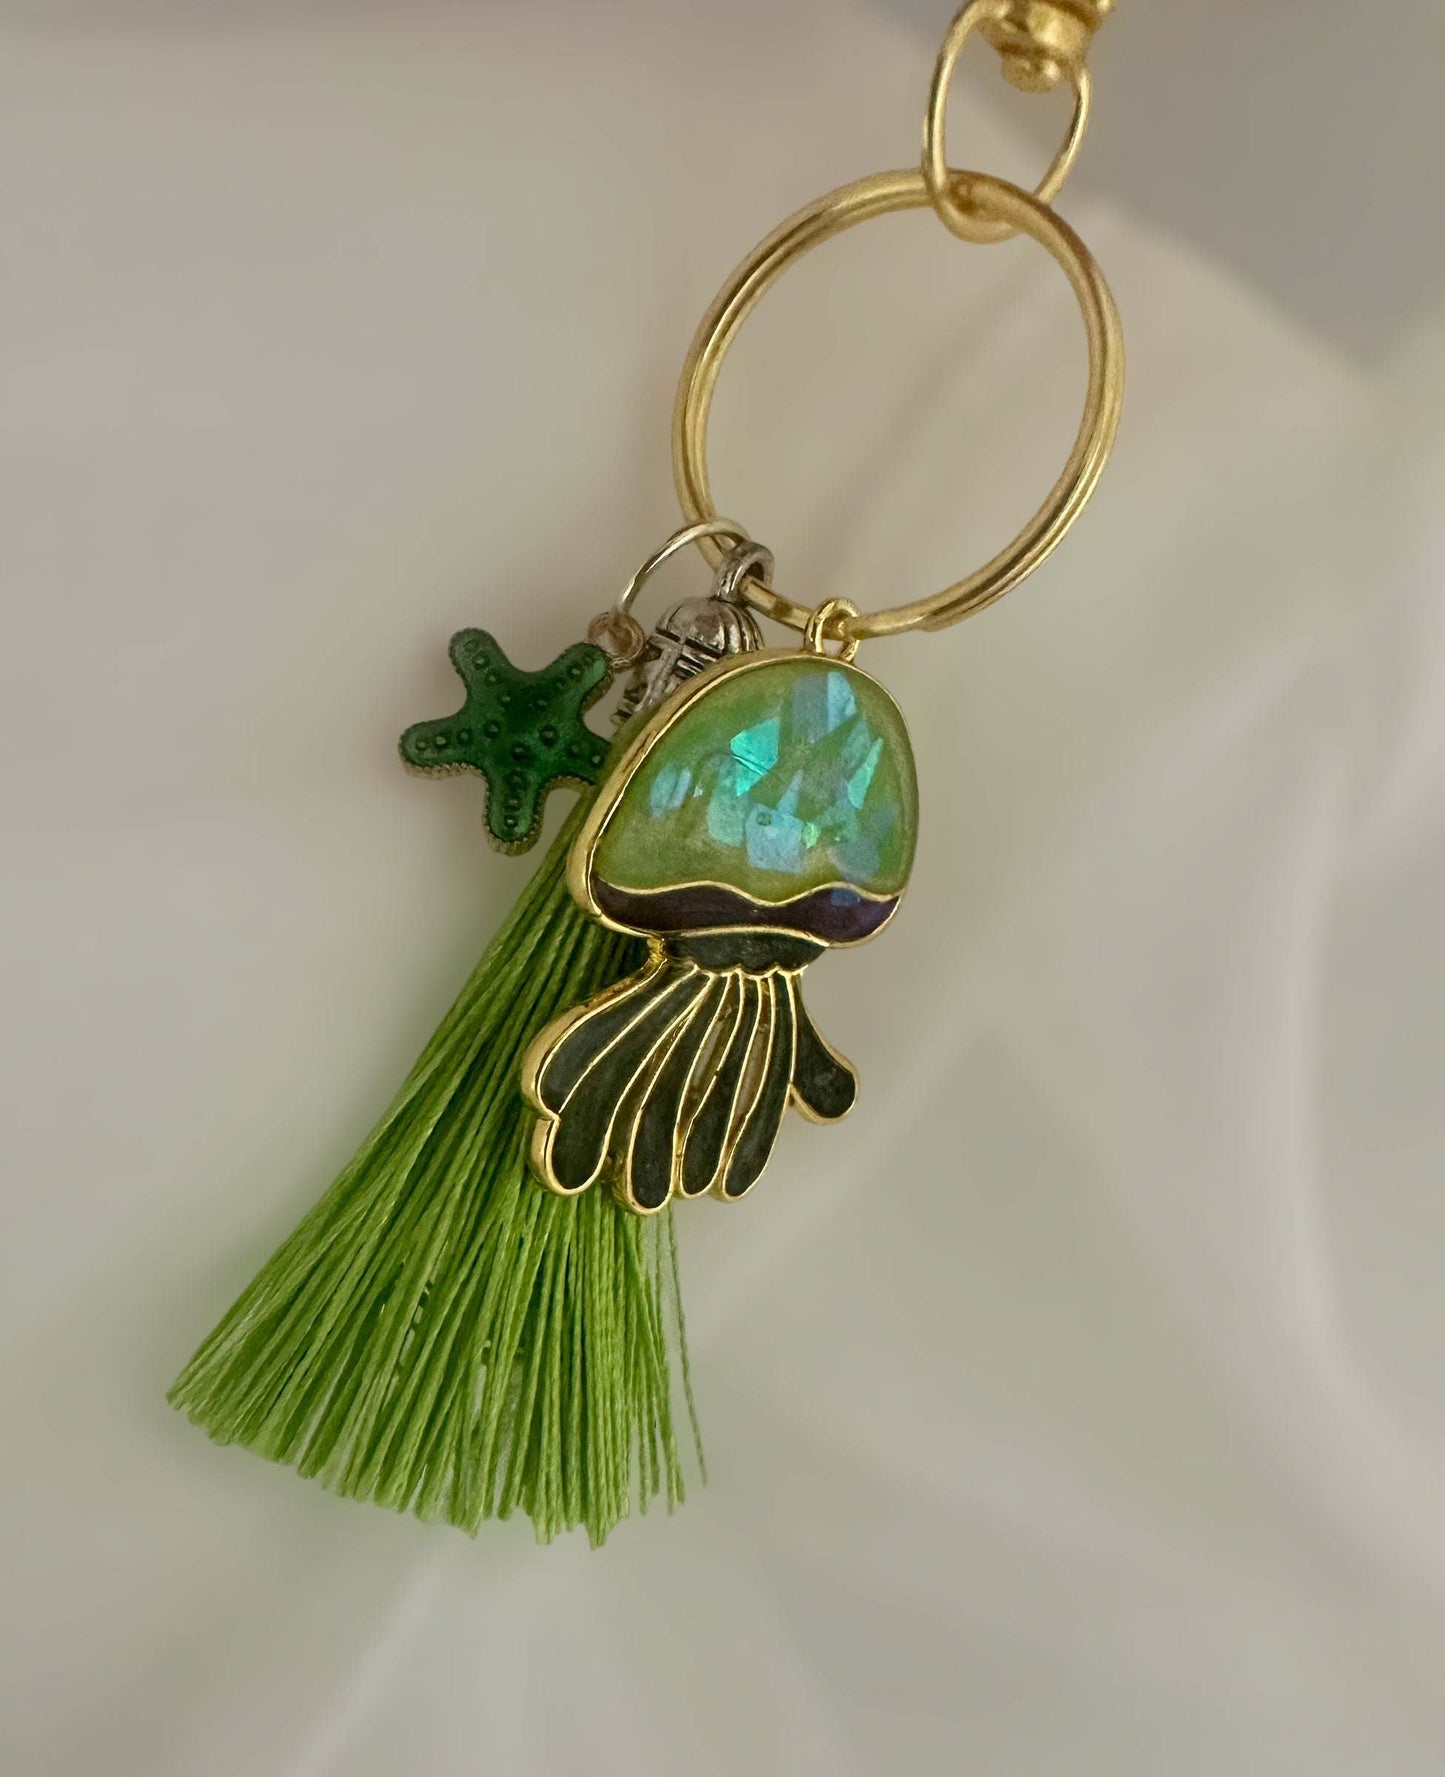 Keychain Vibrant Resin Jelly Fish: Add a Pop of Color and Whimsy 